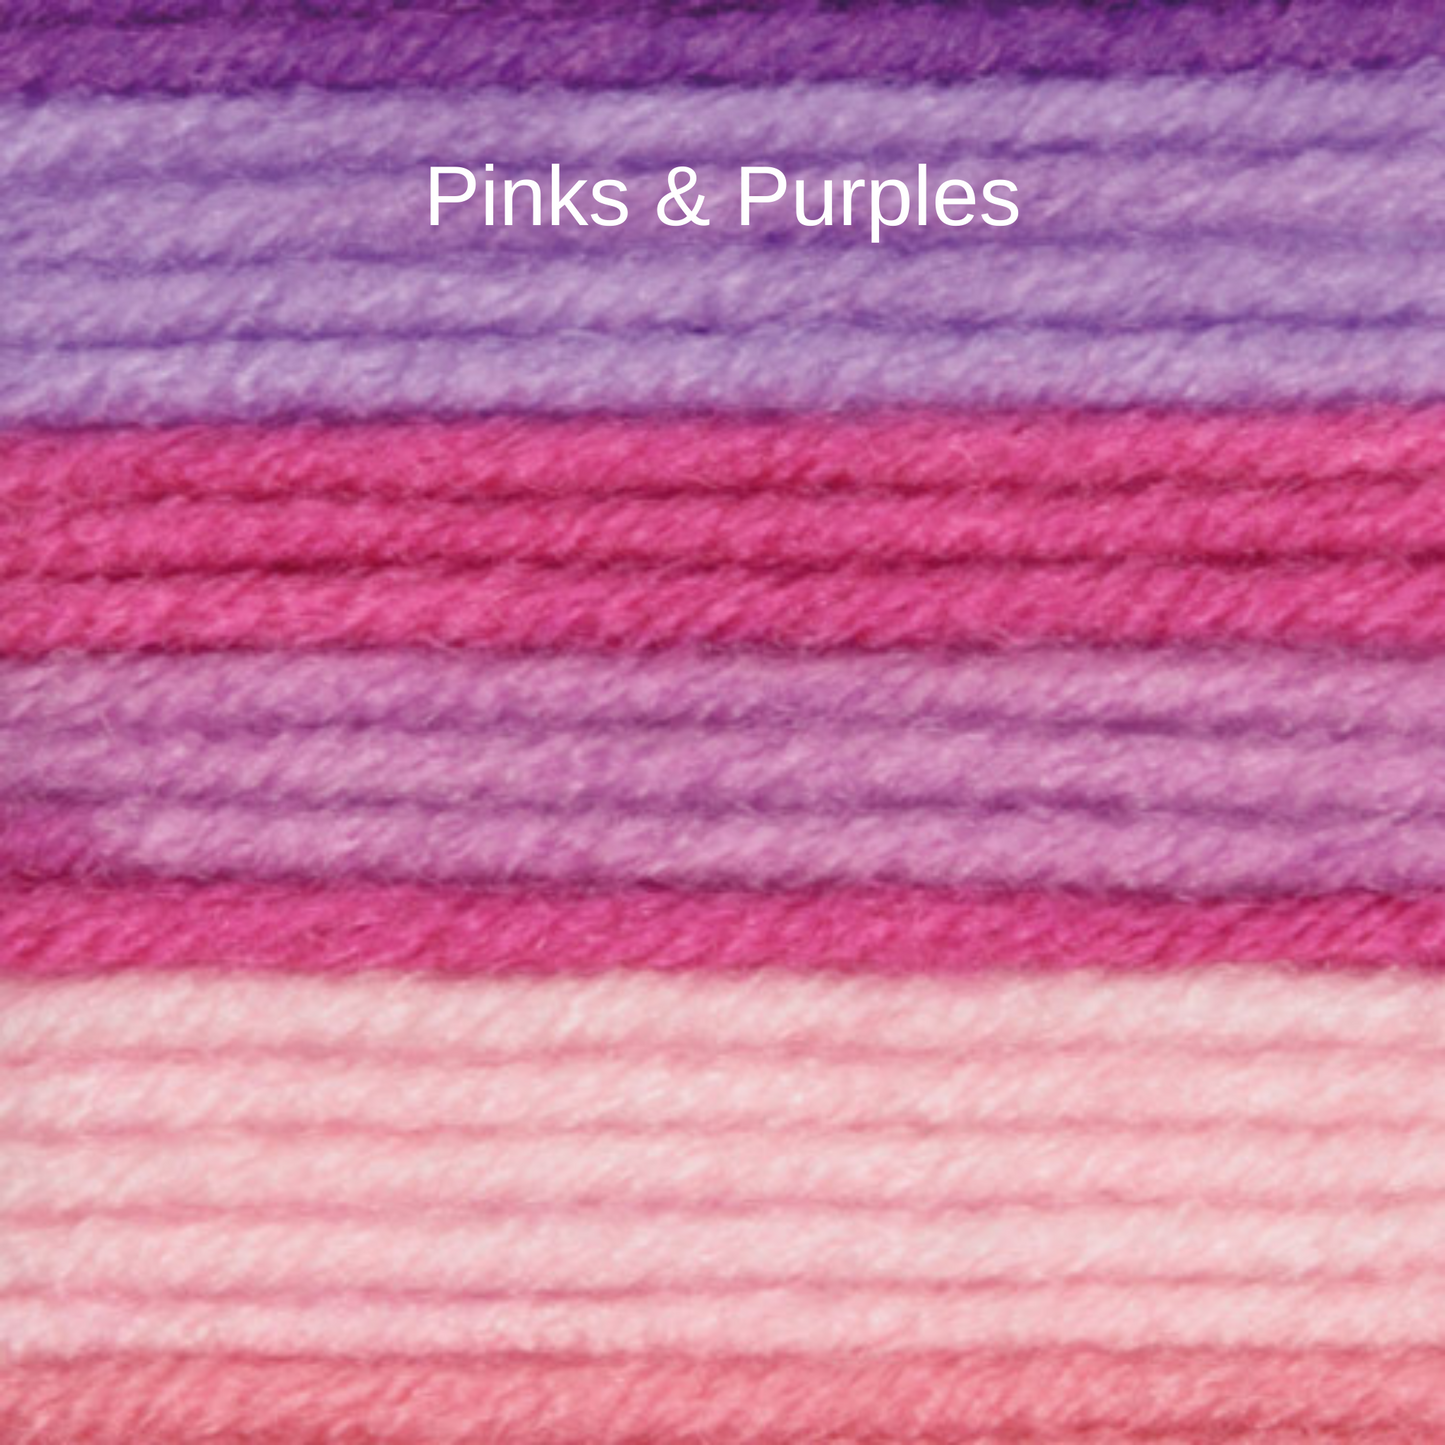 Colours in Pinks & Purples Wool option - dark and light purple, light pink and dark pink